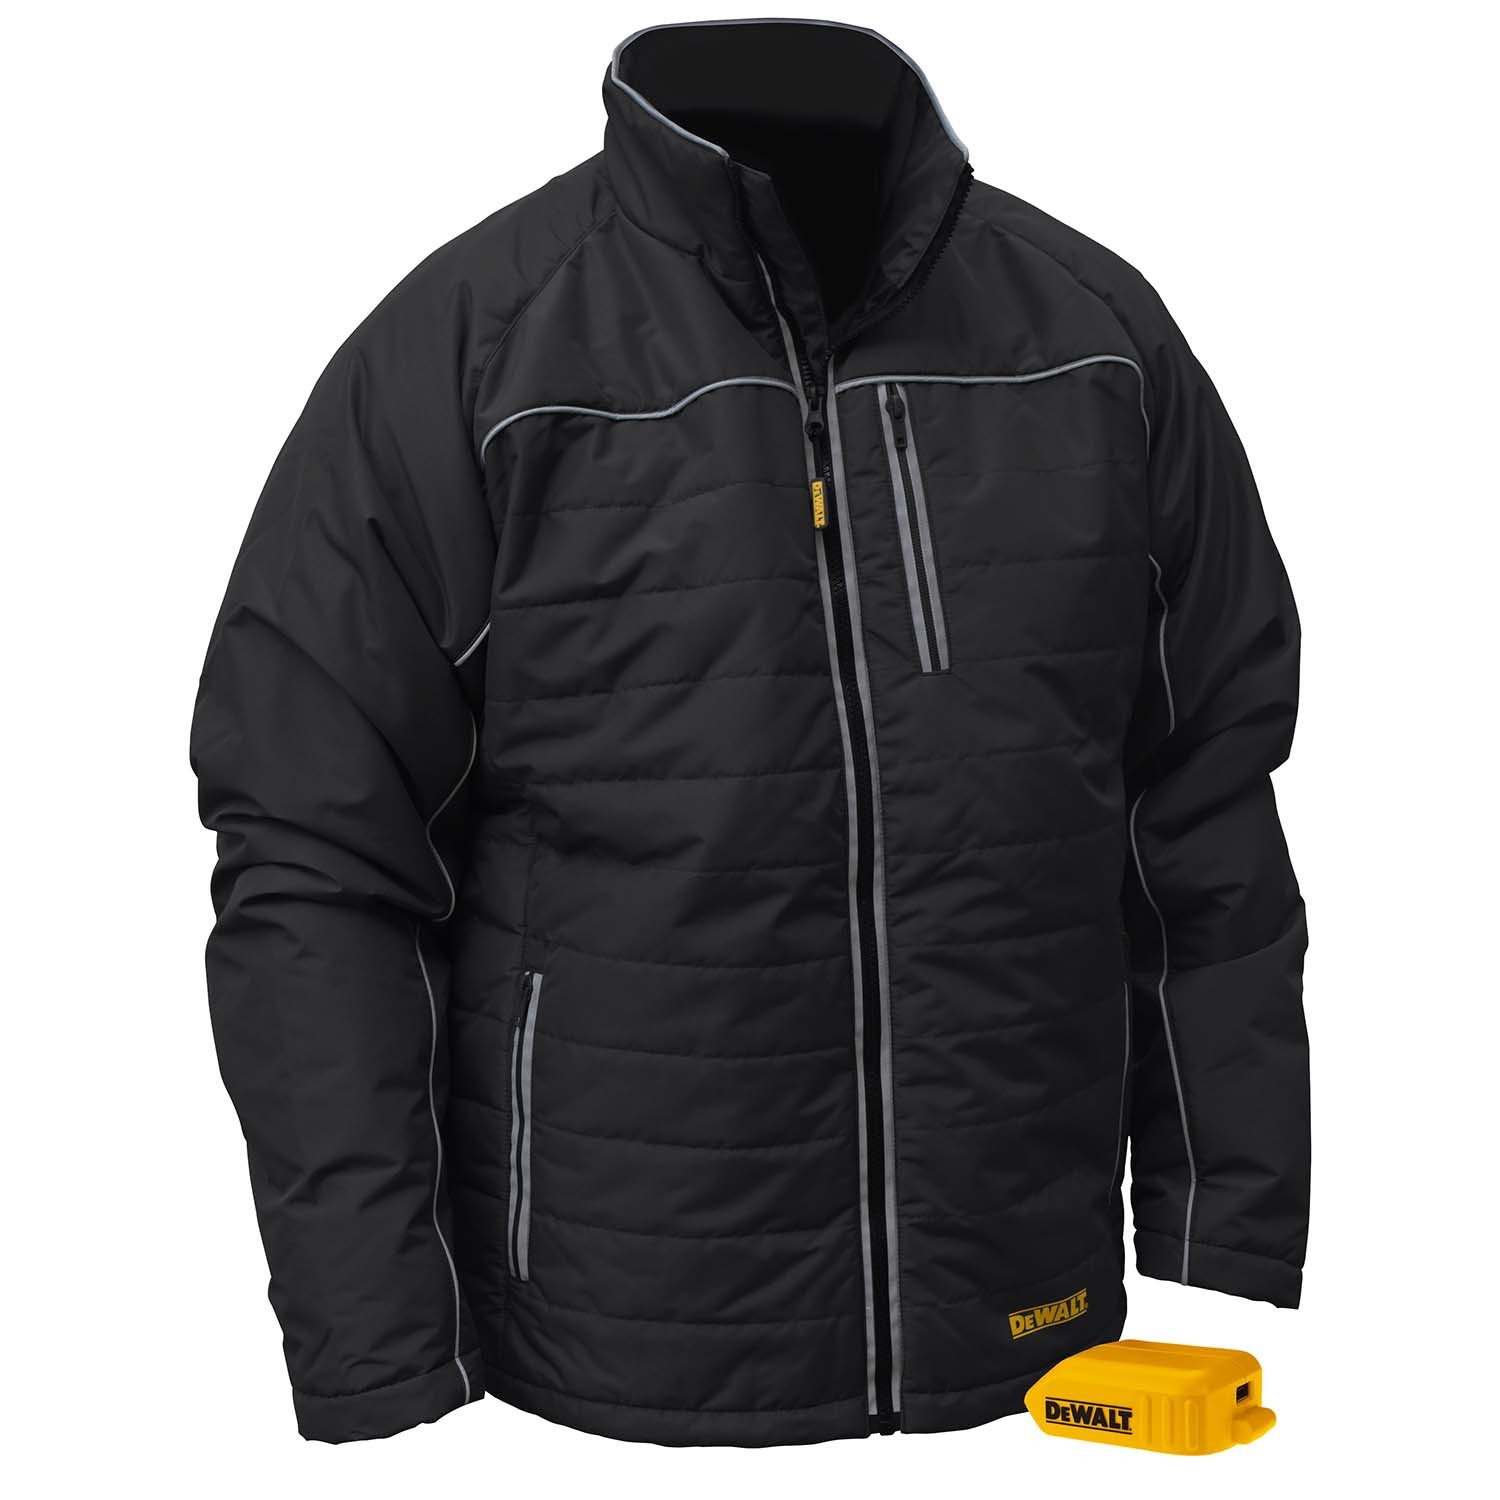 DEWALT® Unisex Heated Quilted Soft Shell Jacket Bare (#DCHJ075B)